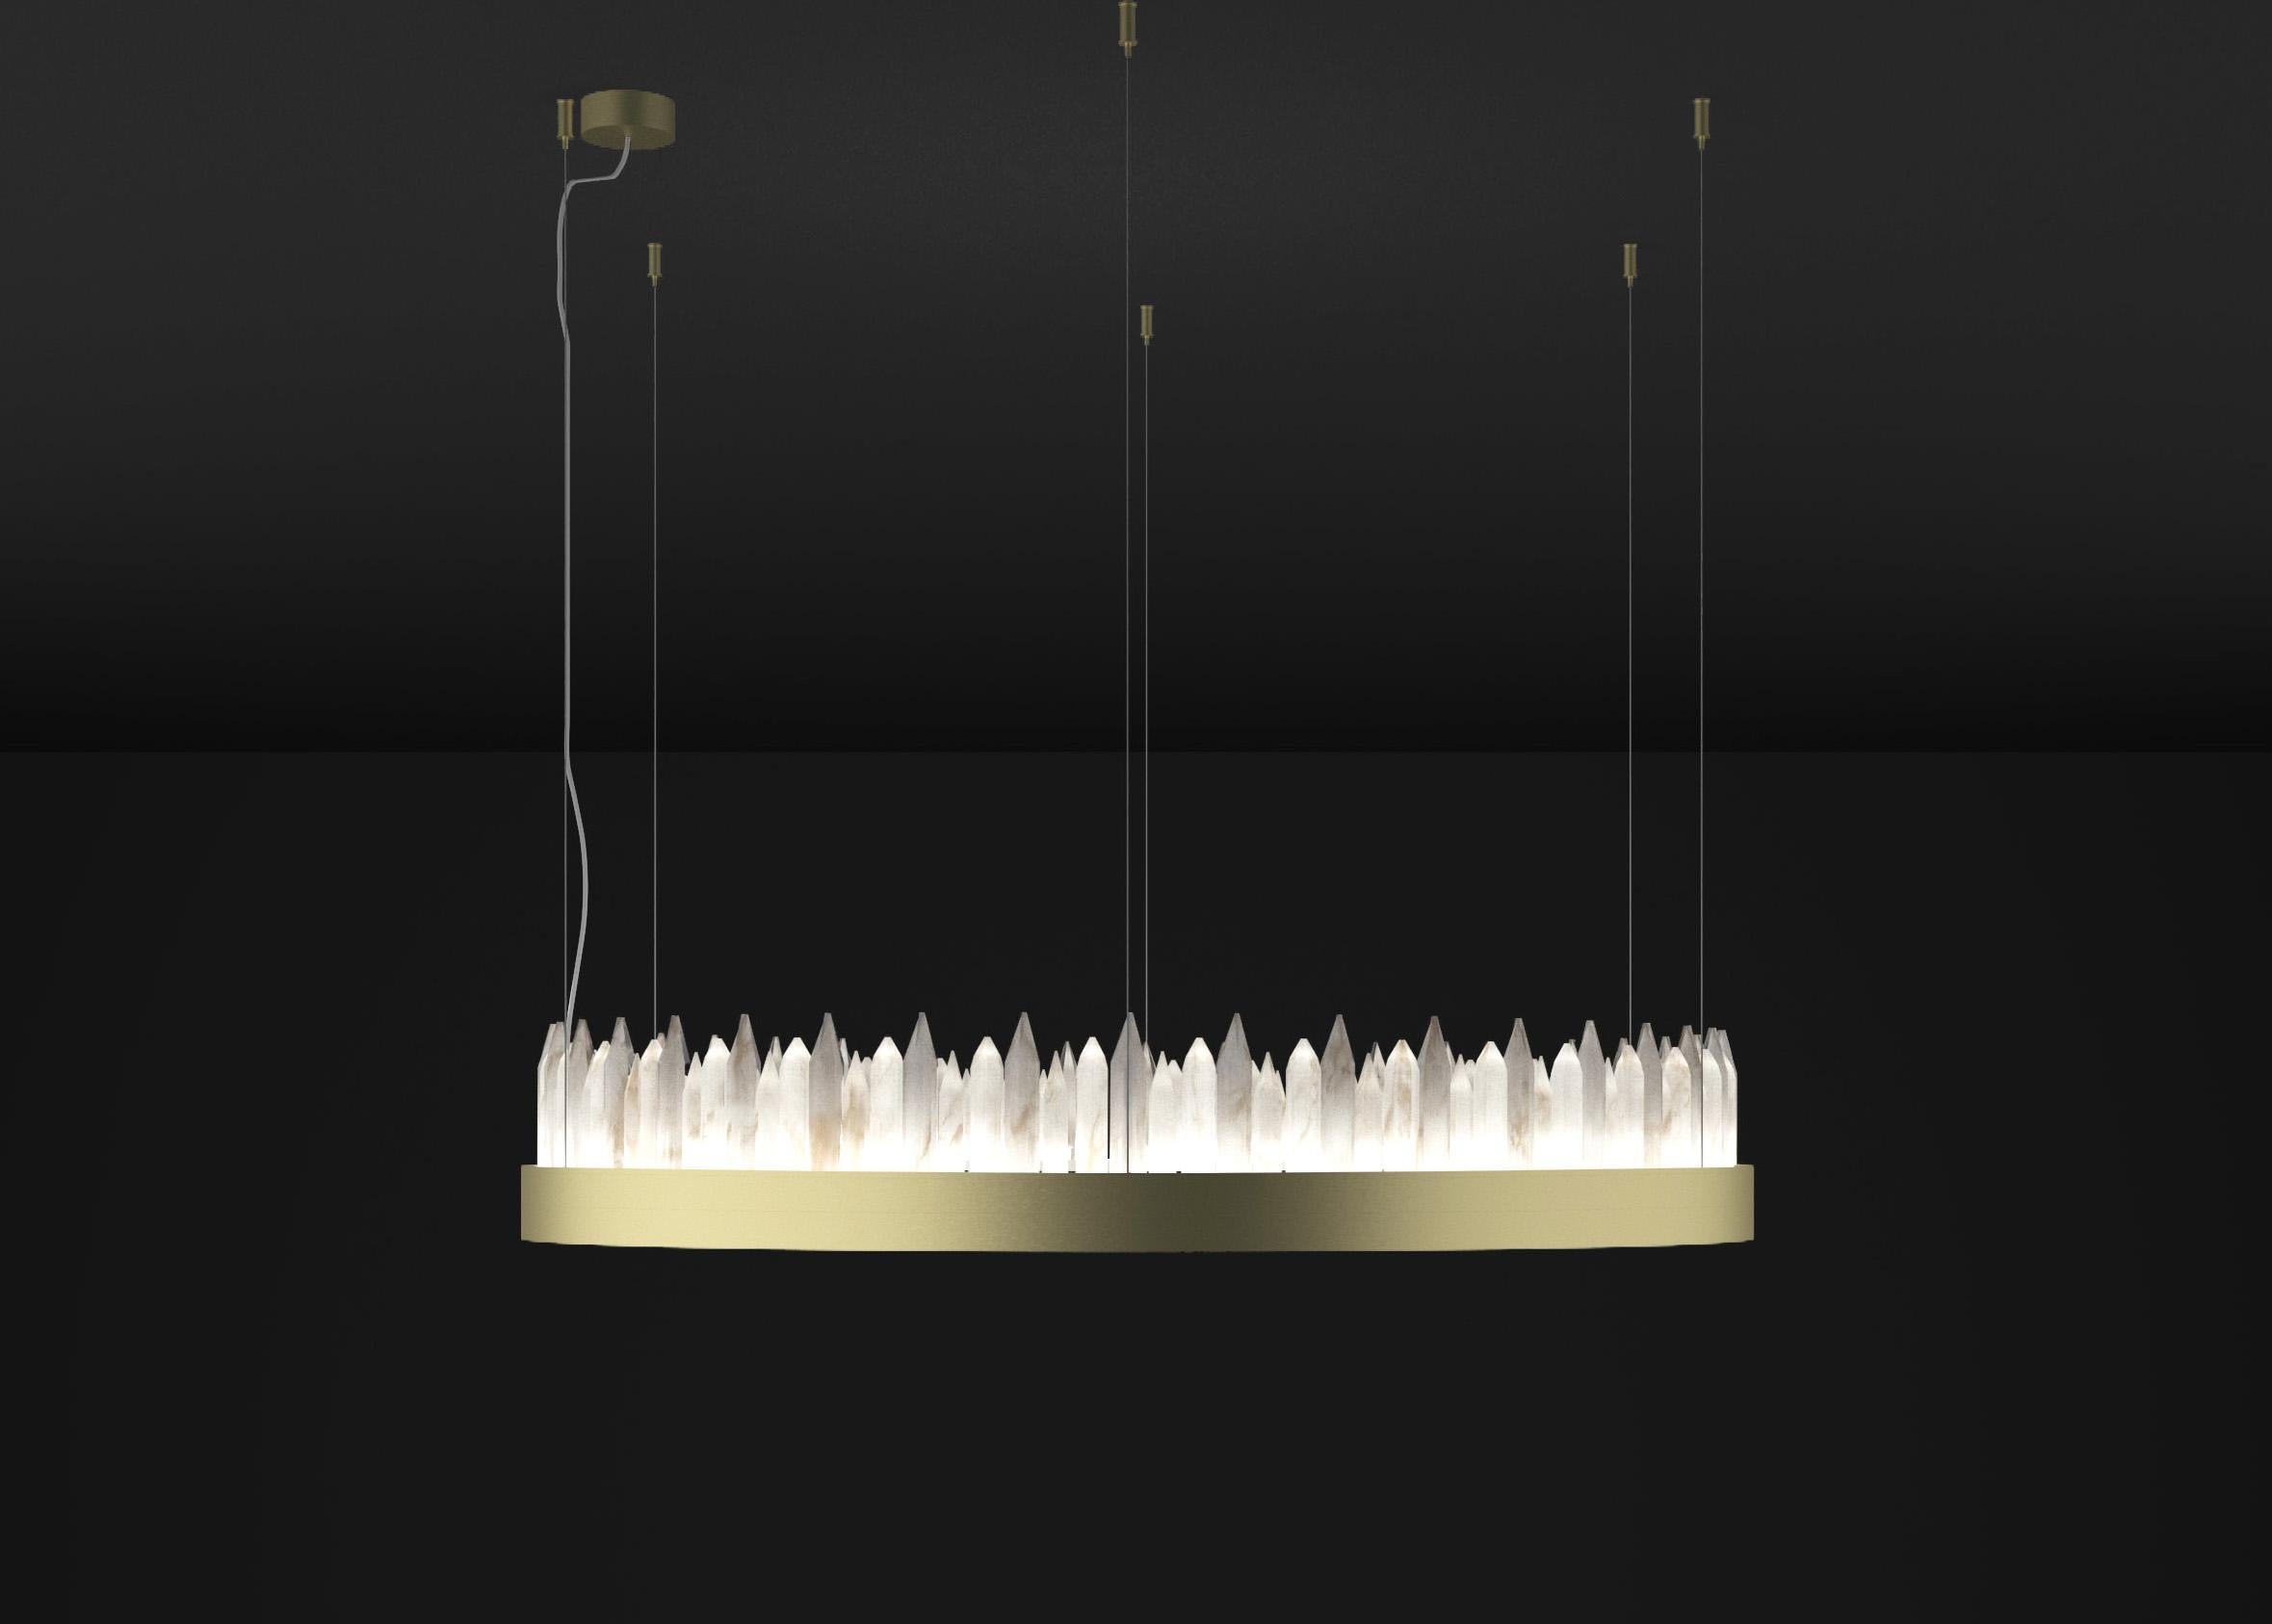 Urano Brushed Brass 60 Pendant Light 3 by Alabastro Italiano
Dimensions: Ø 60 x H 20 cm.
Materials: Glass and brushed brass

2 Strip LED, 81 Watt, 8121 Lumen, 24 V, 3000 K, Wiring CE.

Available in different sizes: Ø 60, Ø 80, Ø 100 and Ø 120 cm.